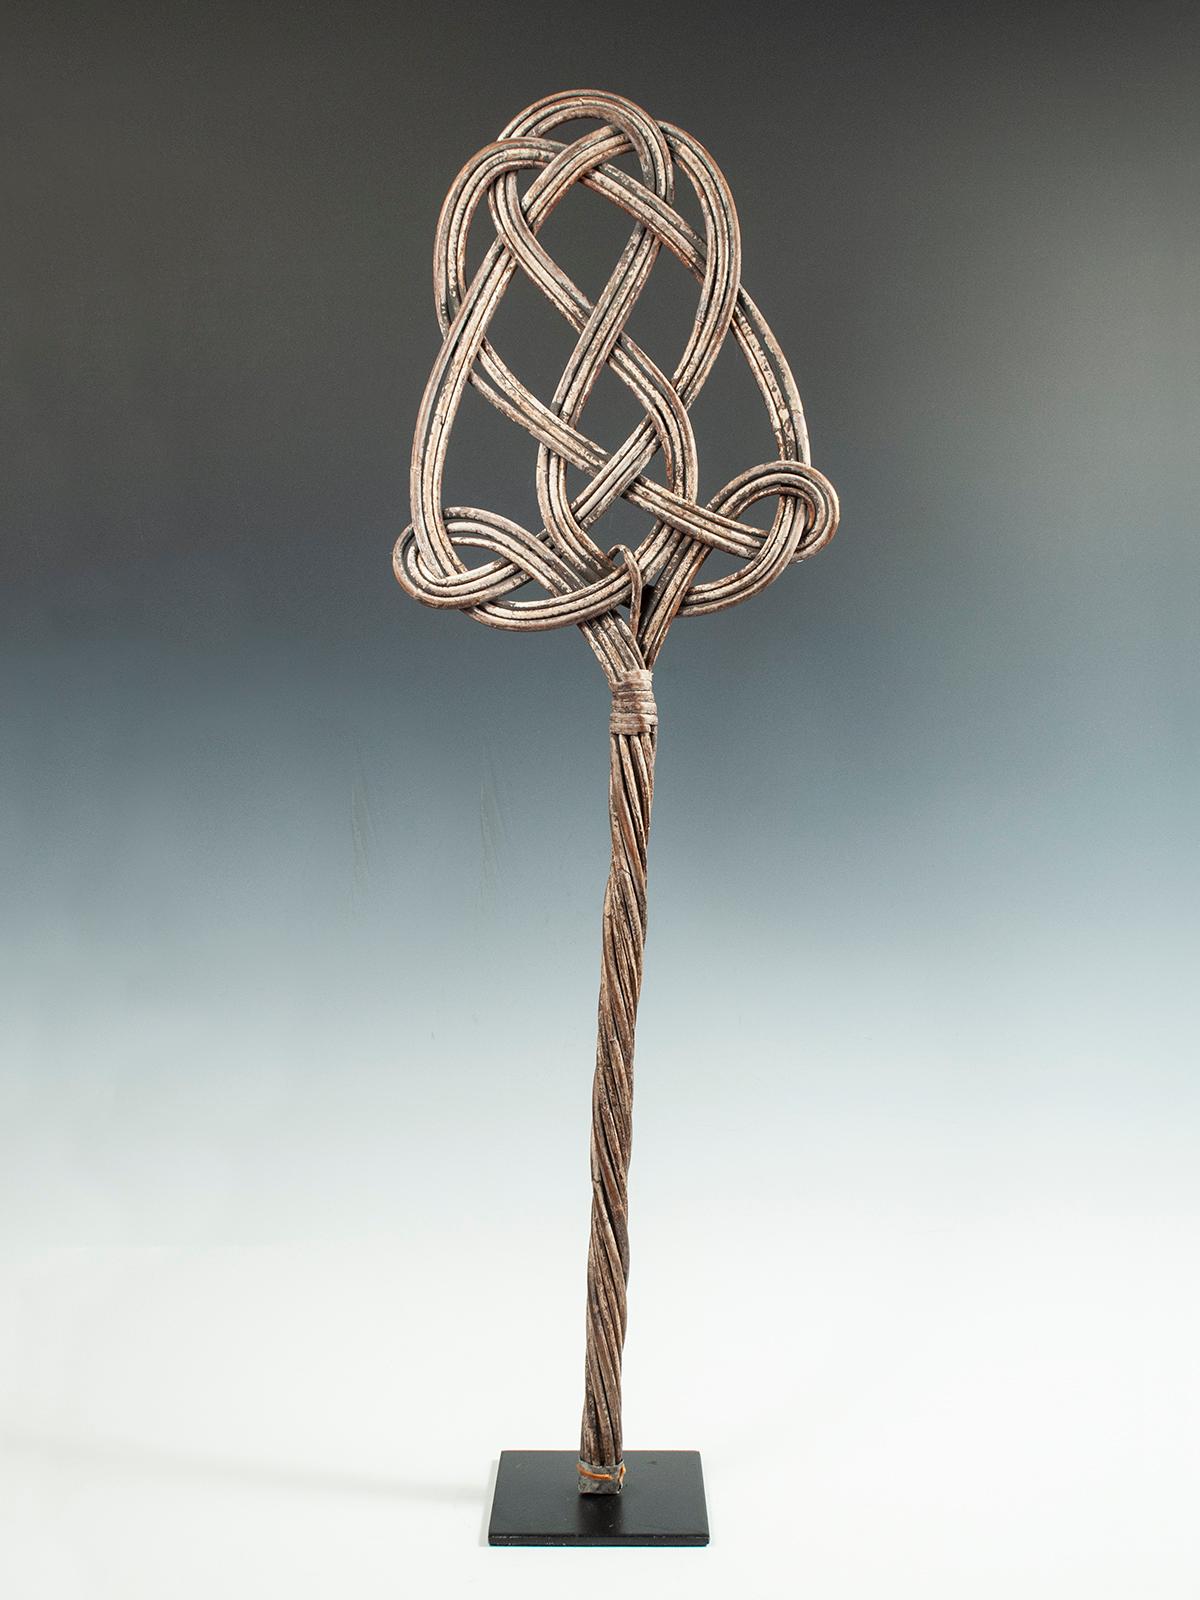 20th century woven cane fabric beater from the Lega People of D. R. Congo

A sculptural piece of African utilitarian ware used to beat the dust out of fabric as it would hang on a line. There are remnants of white paint and it is sold mounted on a